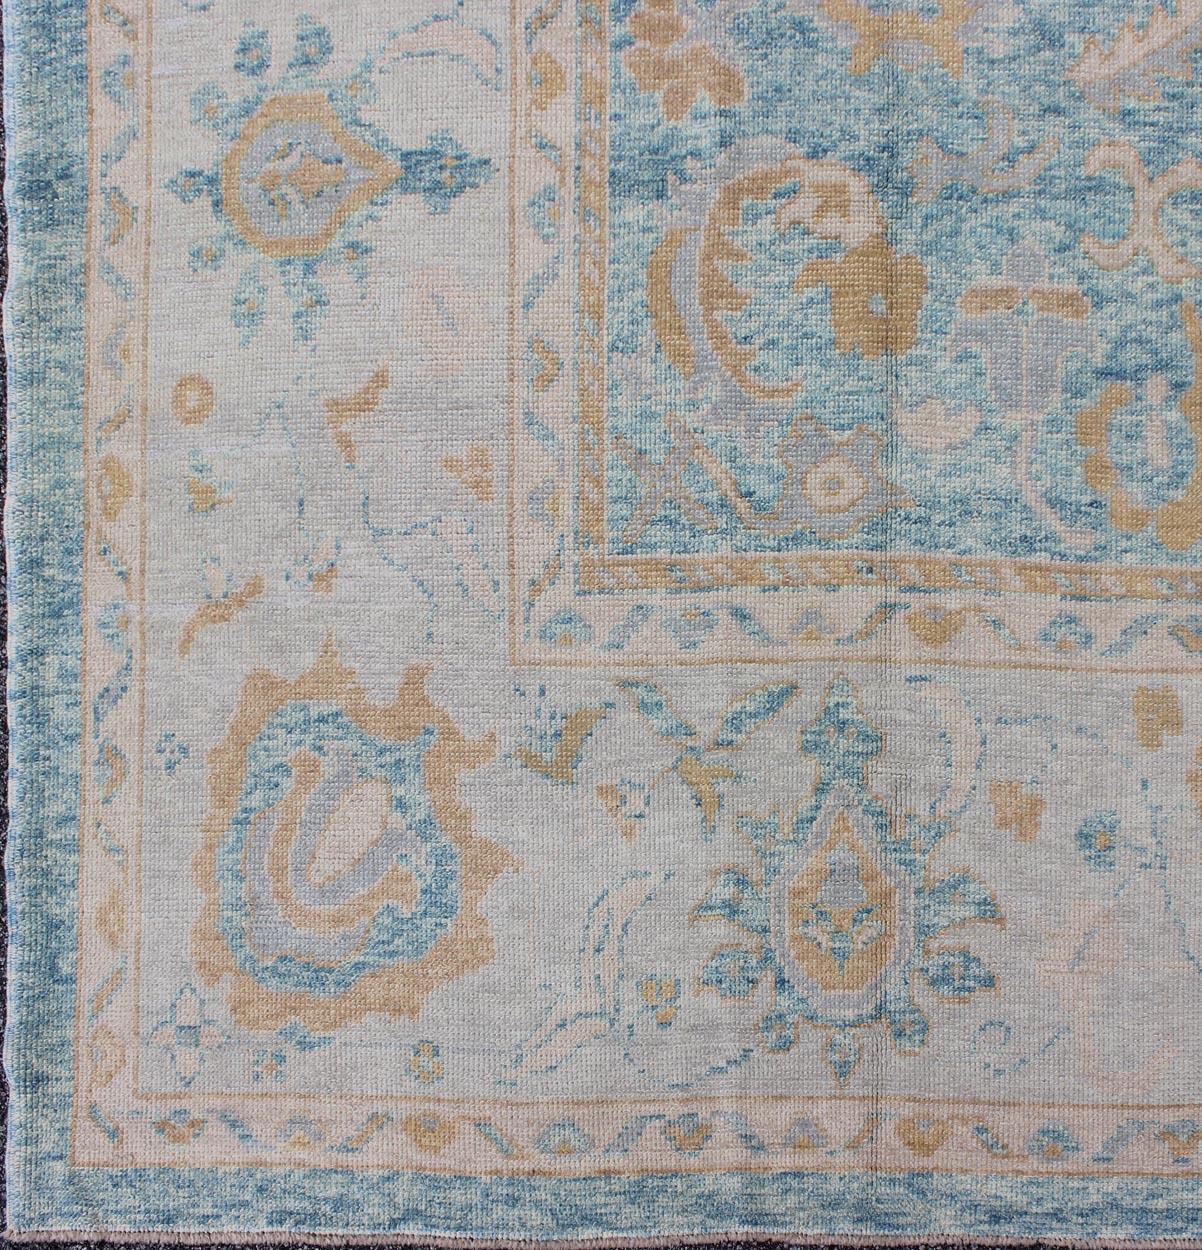 Blue, Silver, Taupe and tan angora Oushak rug from Turkey. Keivan Woven Arts / rug MSD-3381, country of origin / type: Turkey / Angora Oushak.
Measures: 10'10 x 12'1.
From our Angora collection, this piece is made with a combination of angora and